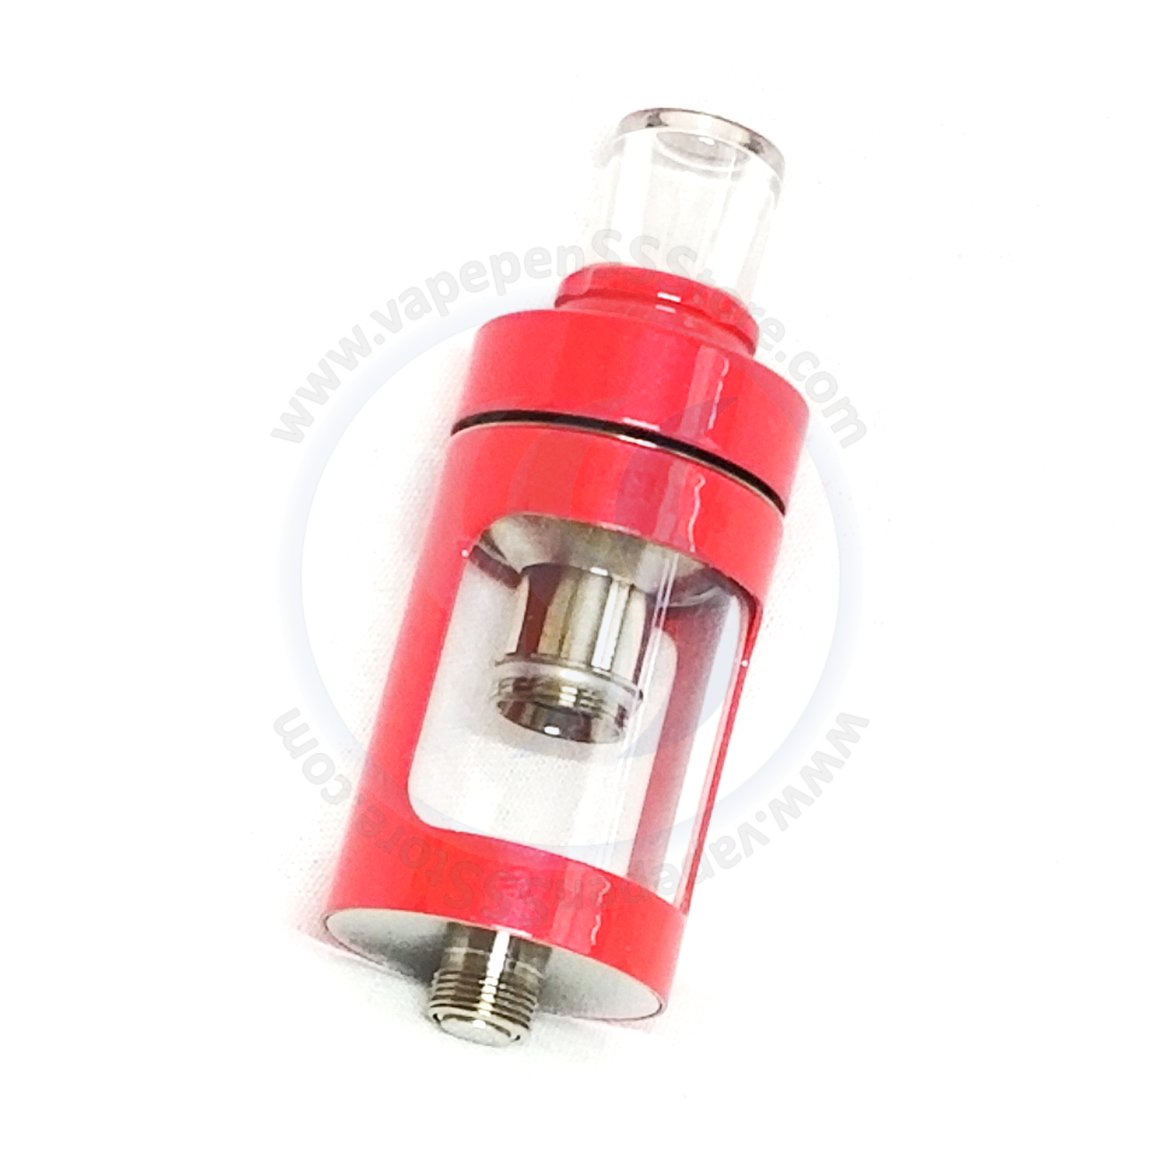 CUBIS Tank  | #Ailment? Stay healthy: #Broomfield #Keystone; #CO | Secure with #TrueUSD | #Accy #VapeCloud #Tank